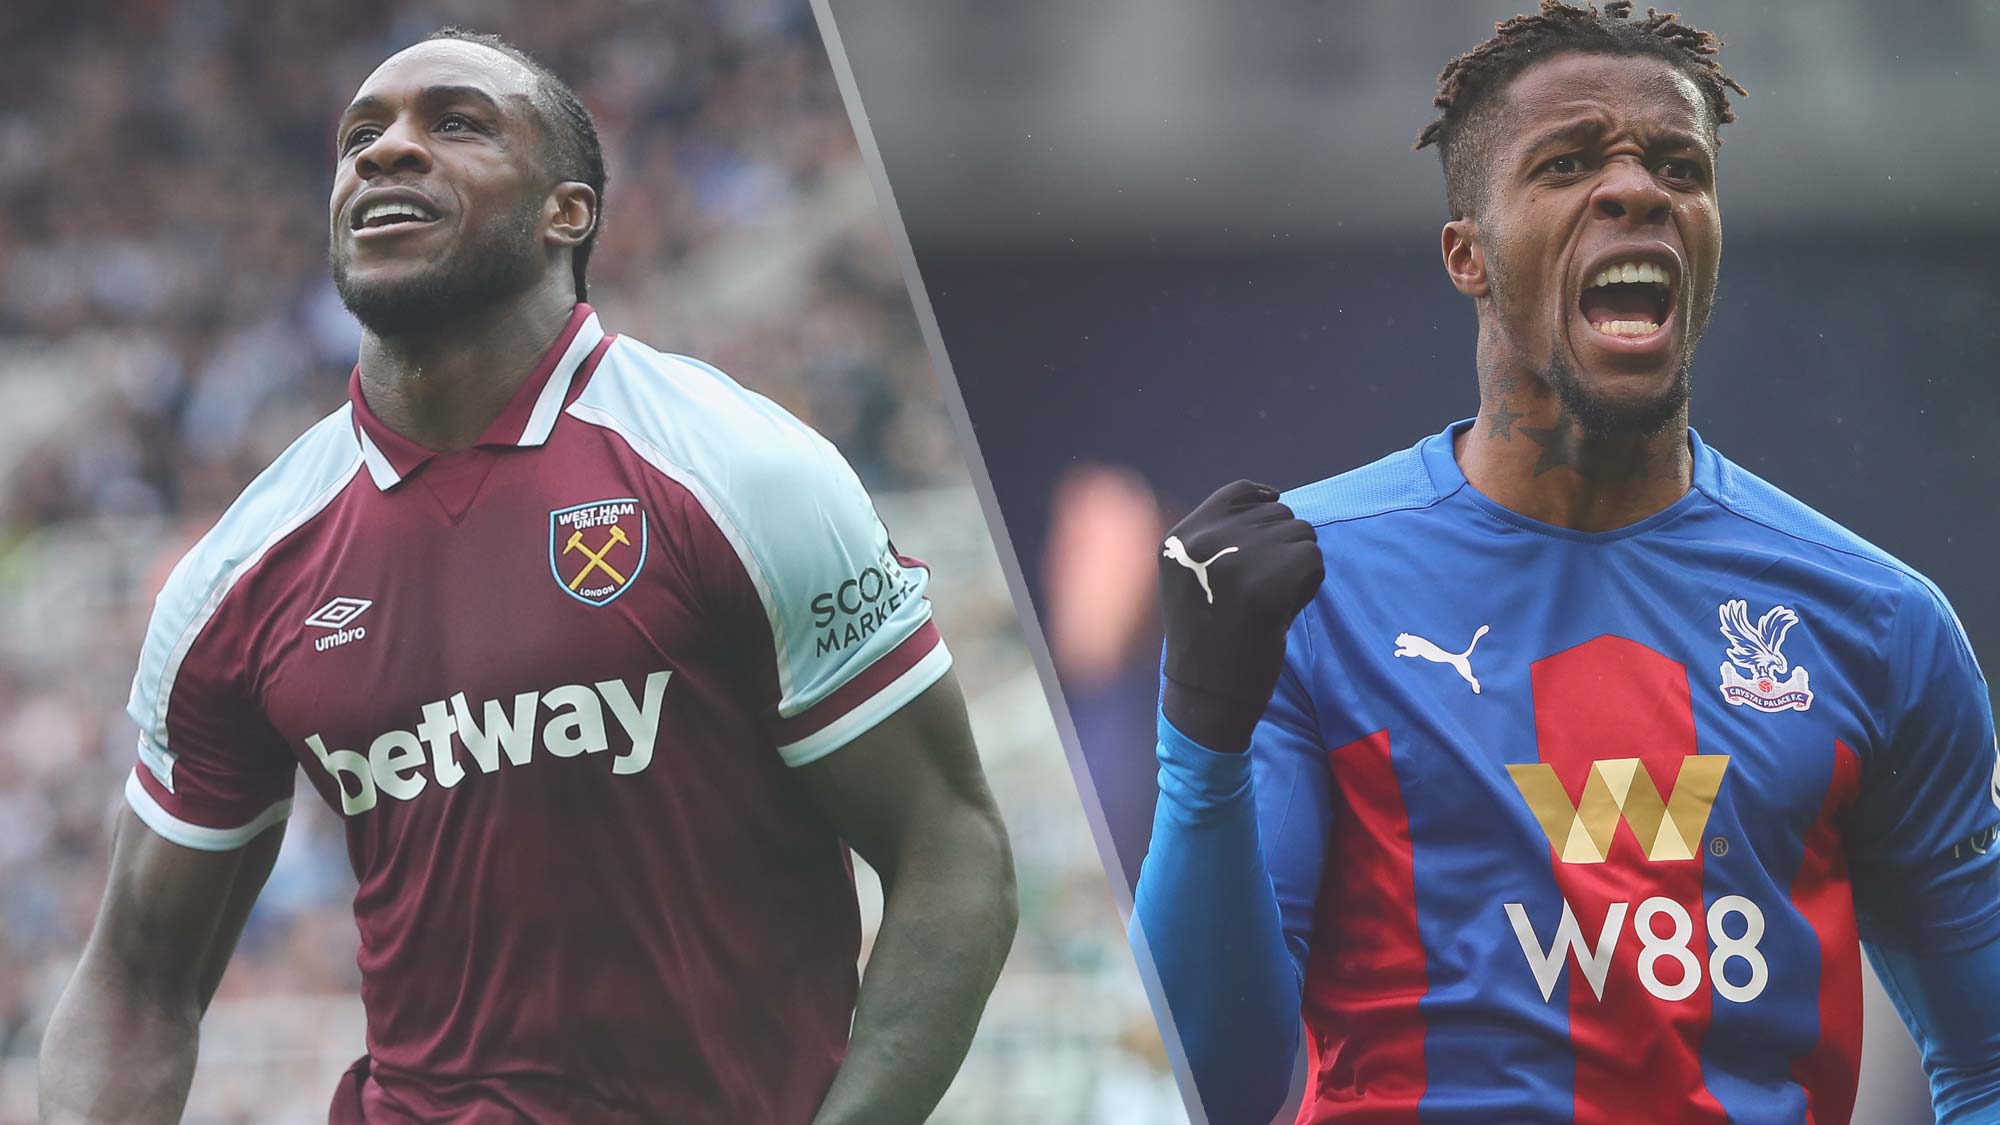 West Ham United vs Crystal Palace live stream — how to watch Premier 21/22 online | Tom's Guide